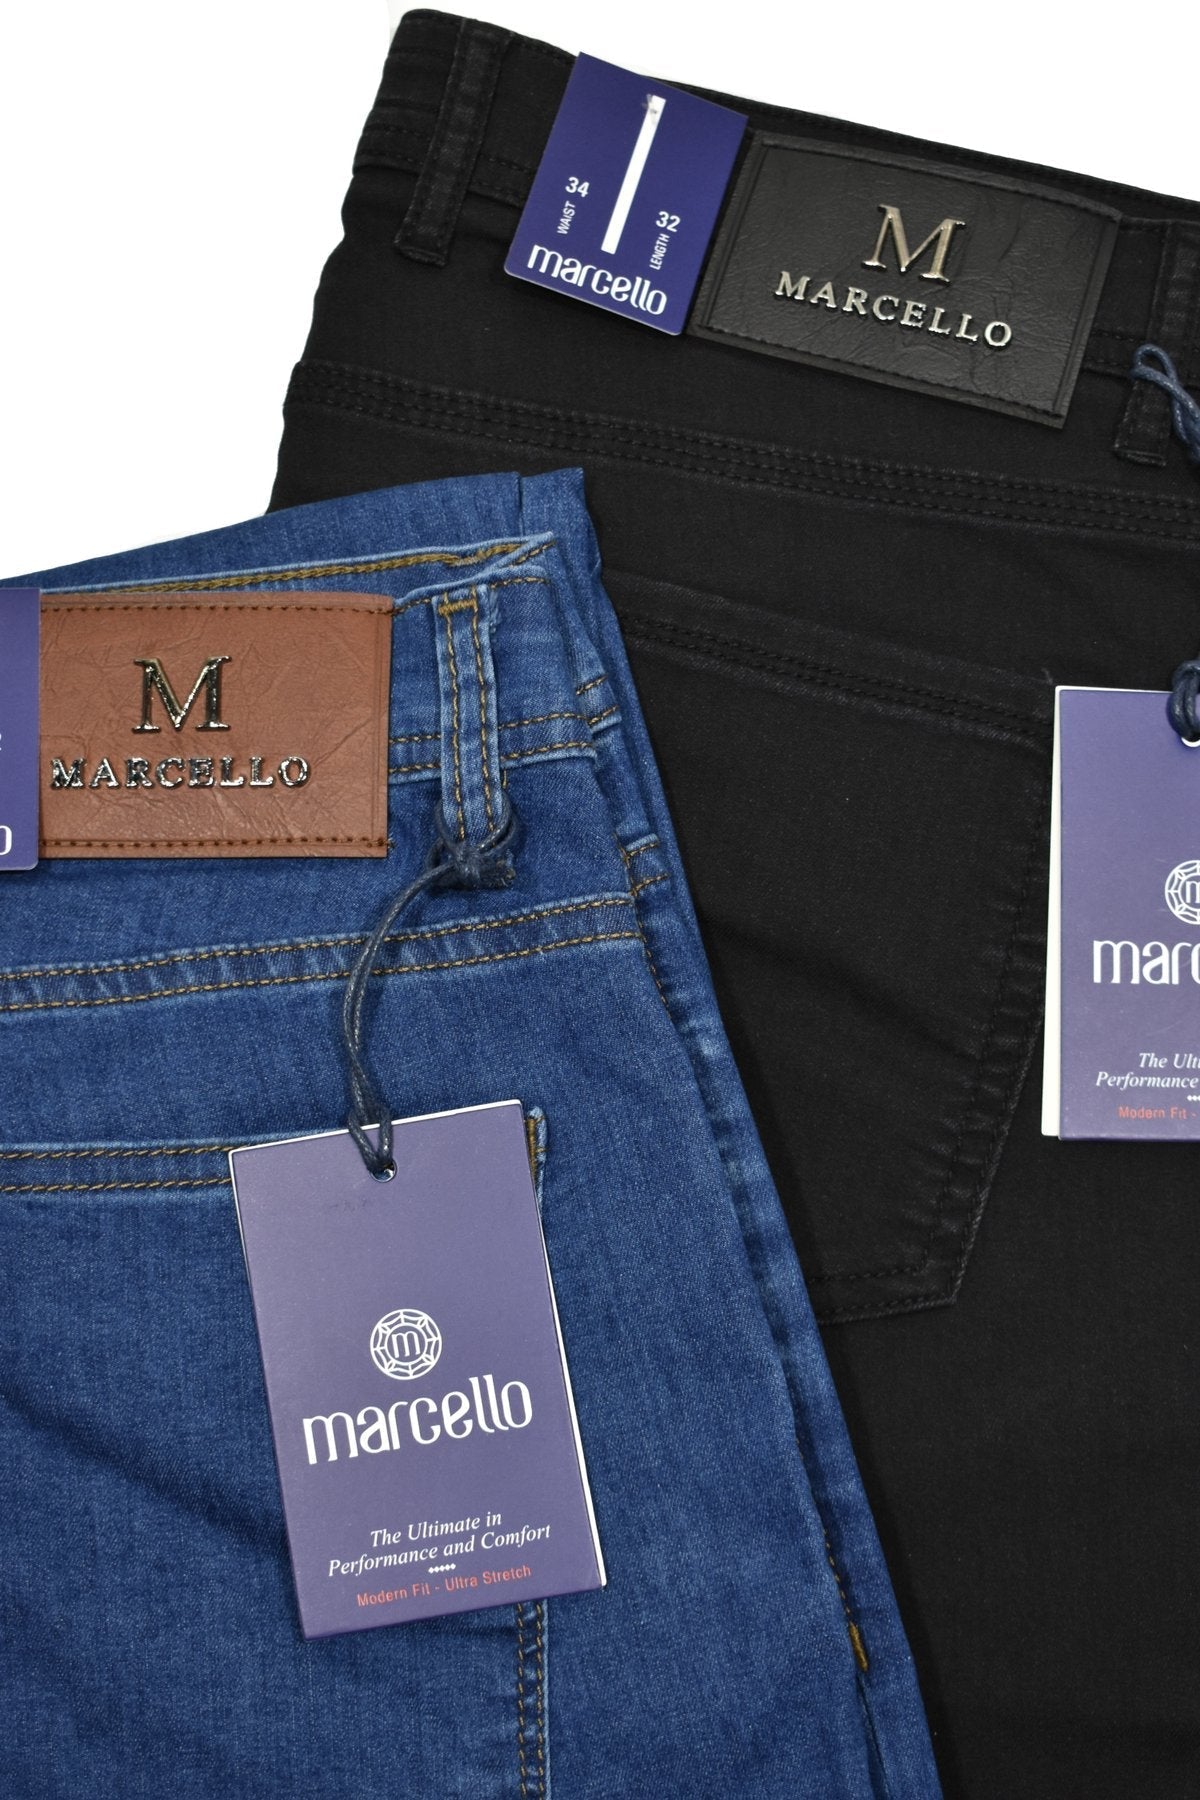 Say goodbye to stiff denim and hello to our LP27 Stretch Lightweight Denim. These jeans feature an ultra-light cotton-elastin fabric that moves with your body for exceptional comfort. The slimmer fit offers a contemporary leg and a relaxed look you'll love! Amazingly comfortable and stylish - what more could you want? A Marcello Exclusive.